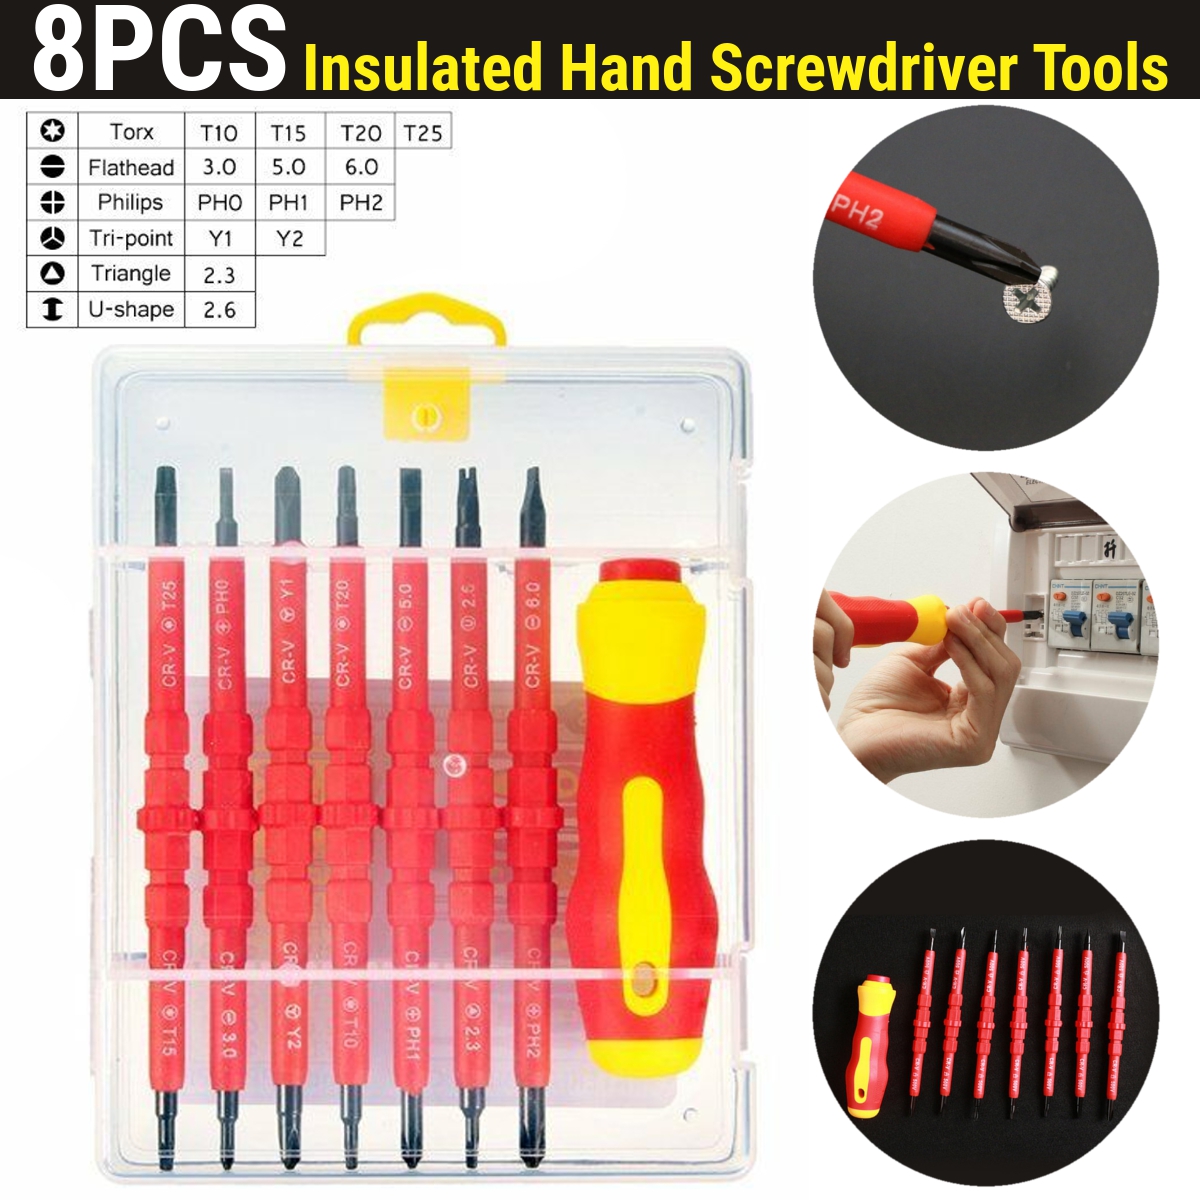 8PCS-Electronic-Insulated-Hand-Screwdriver-Tools-Accessory-Set-DIY-Magnetic-Tips-1723243-1